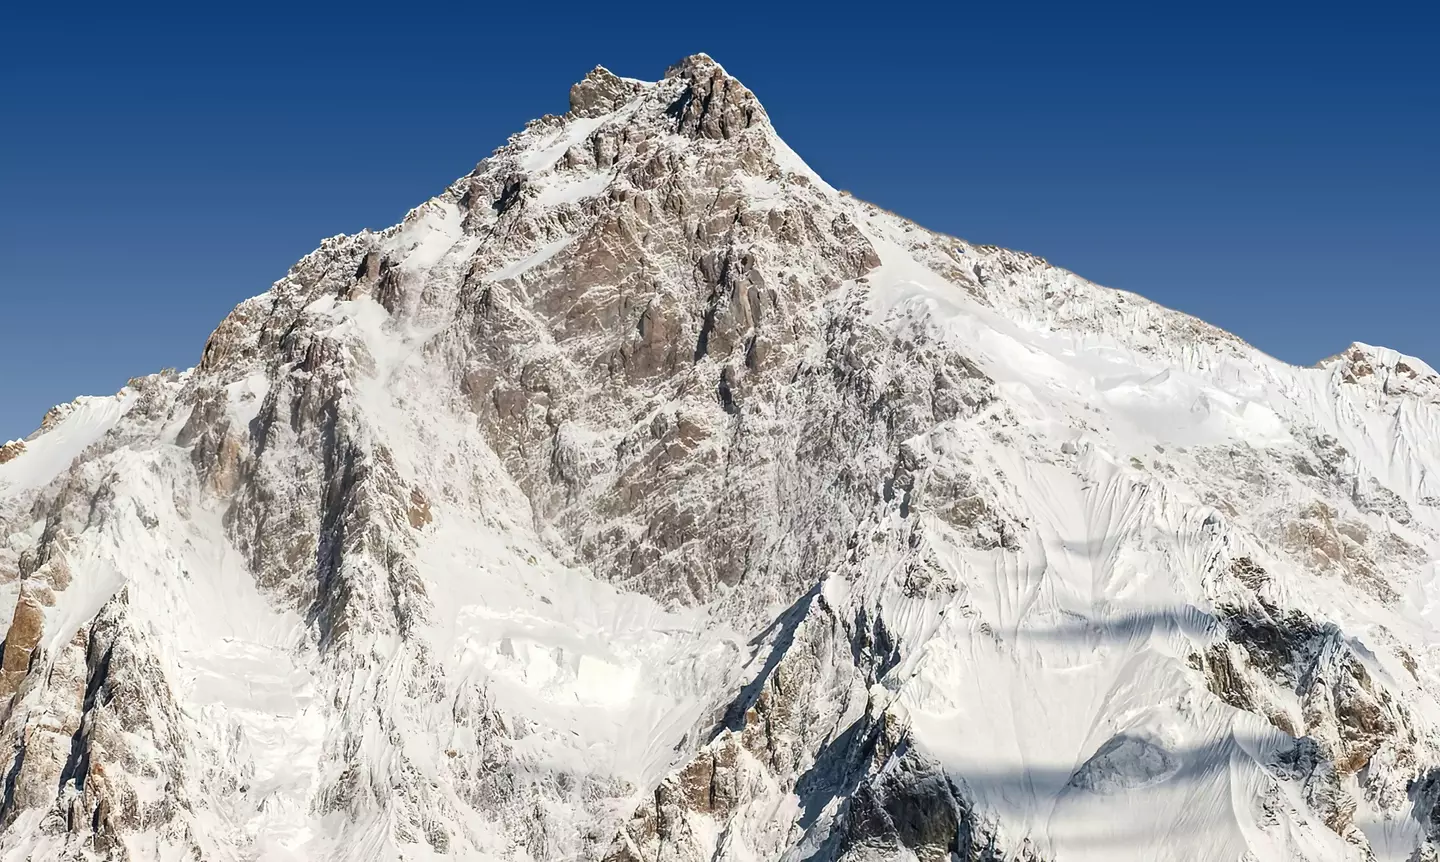 Nanga Parbat mountain in Pakistan is outgrowing Everest, and should overtake in about 241,000 years, which is quite speedy in the grand scheme of things.